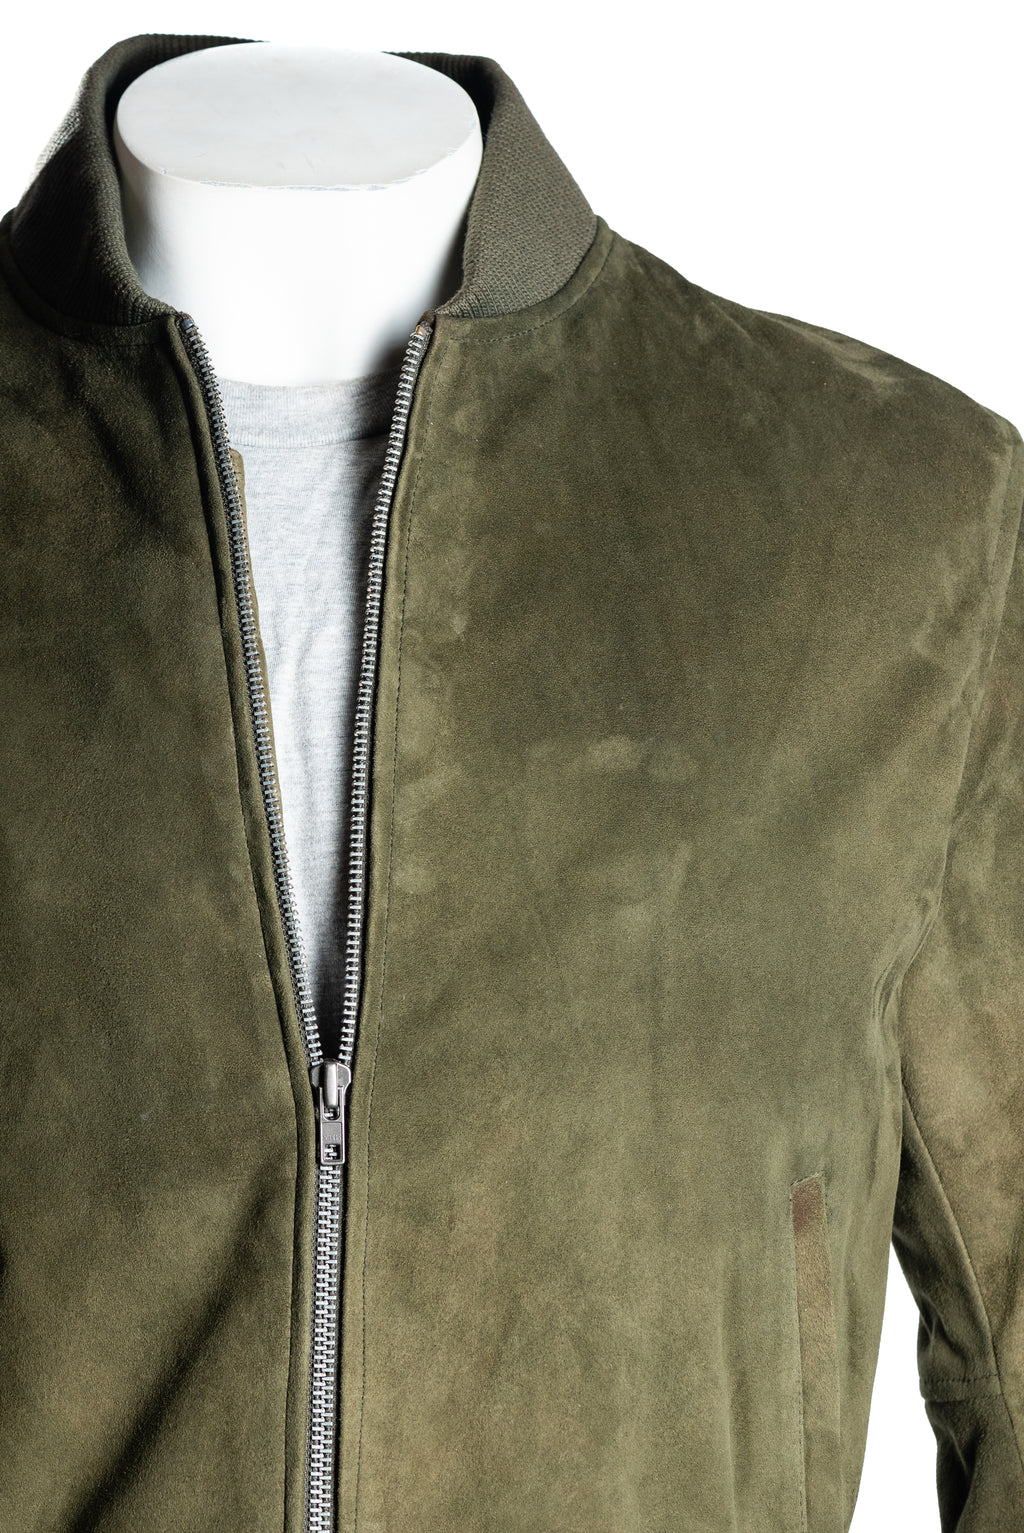 Men's Olive Green Rib-Knit Collar Suede Bomber: Benedict